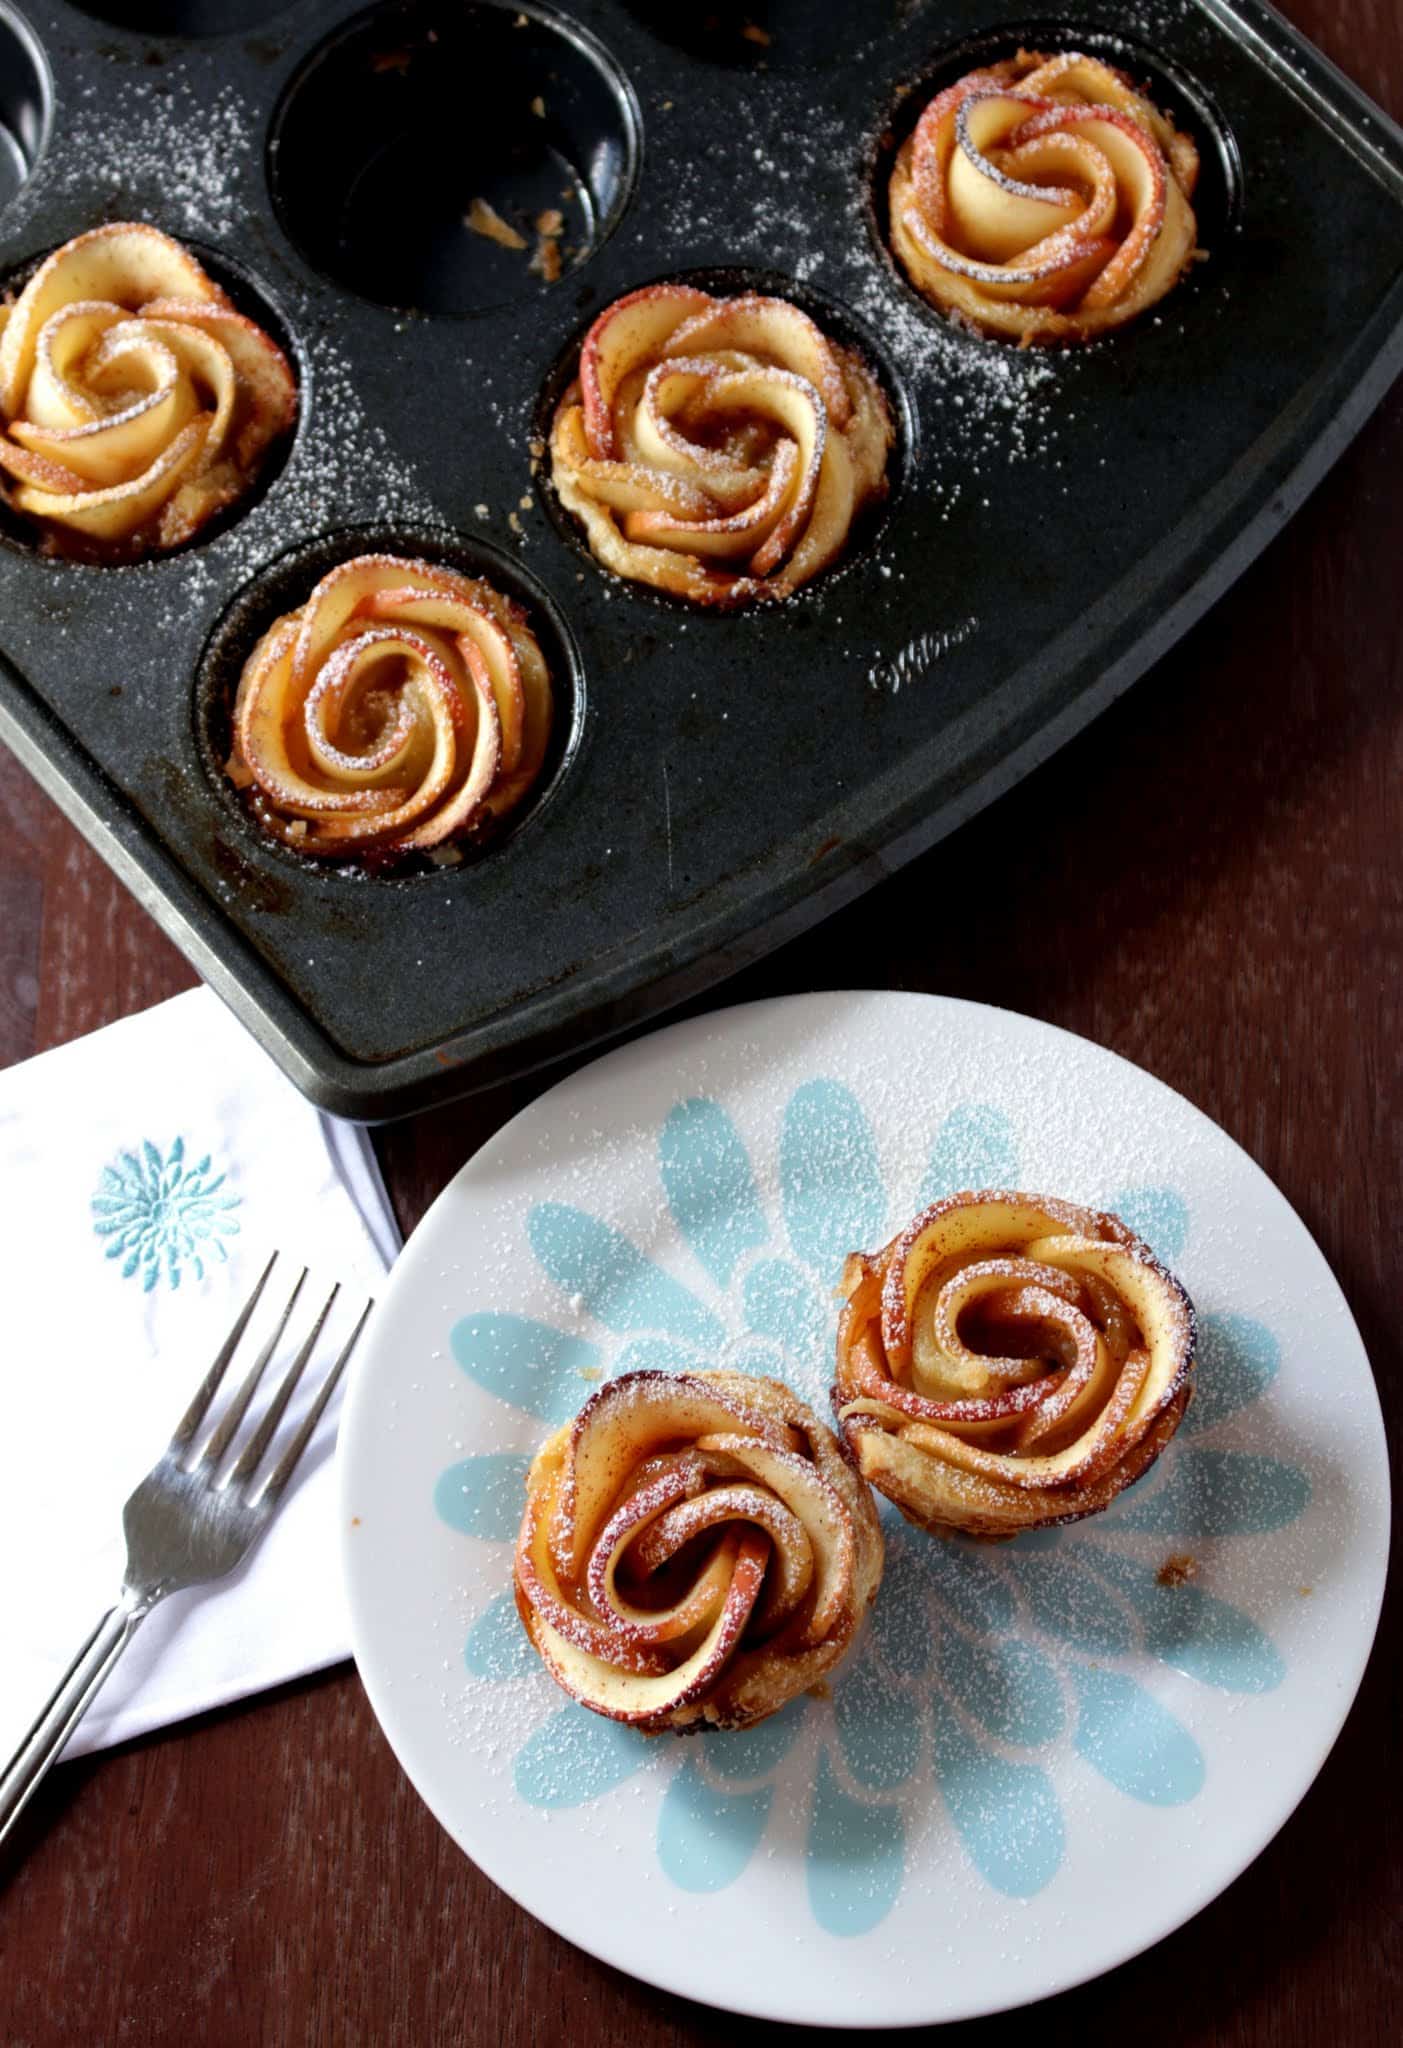 Baked Apple Roses With Puff Pastry in the tray and served in plate with fork on side